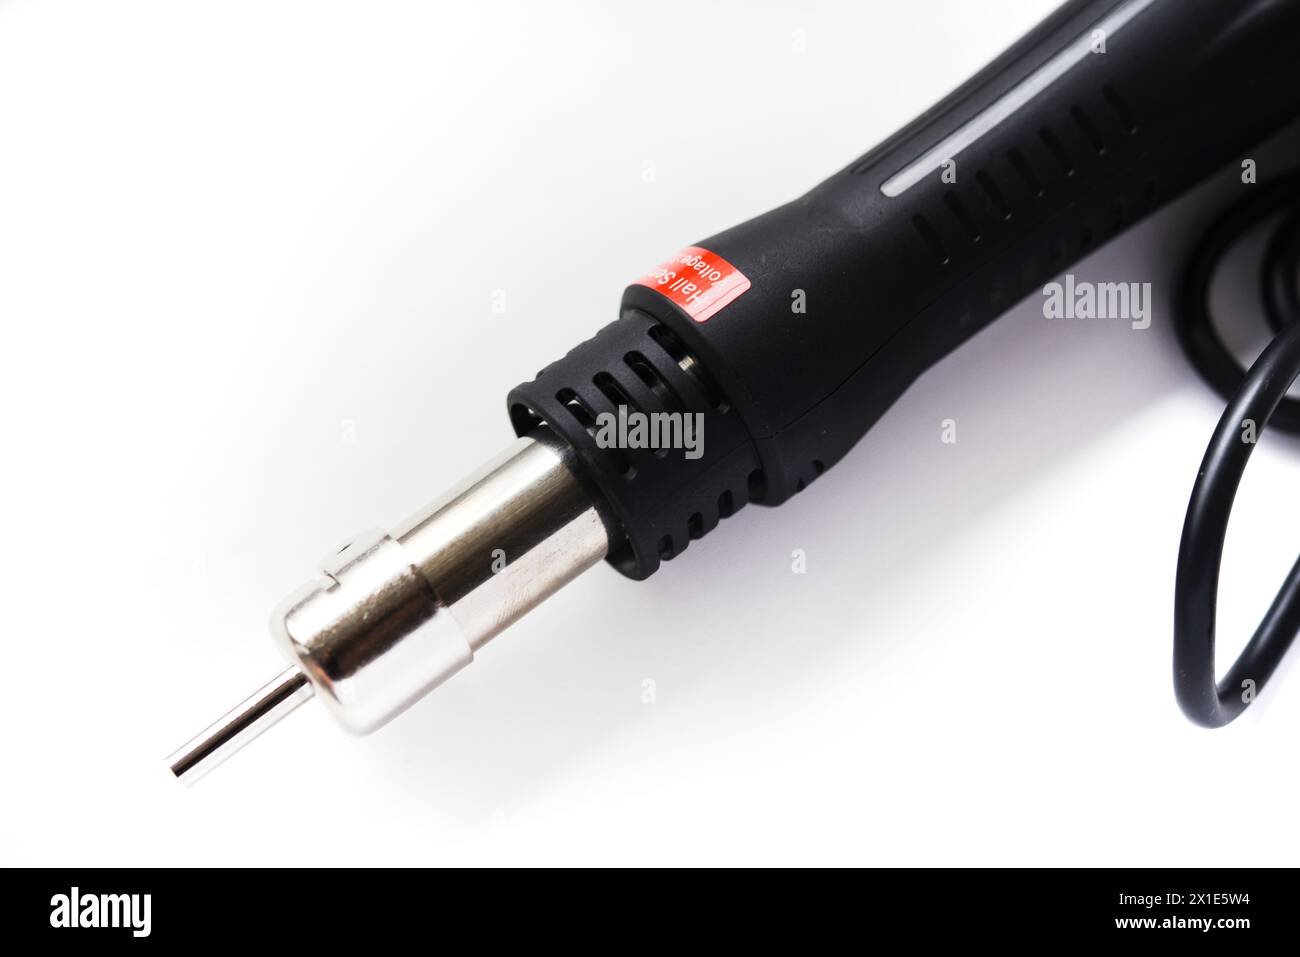 The heat gun of the soldering station. Soldering iron for electronic circuit boards on a white background. Stock Photo